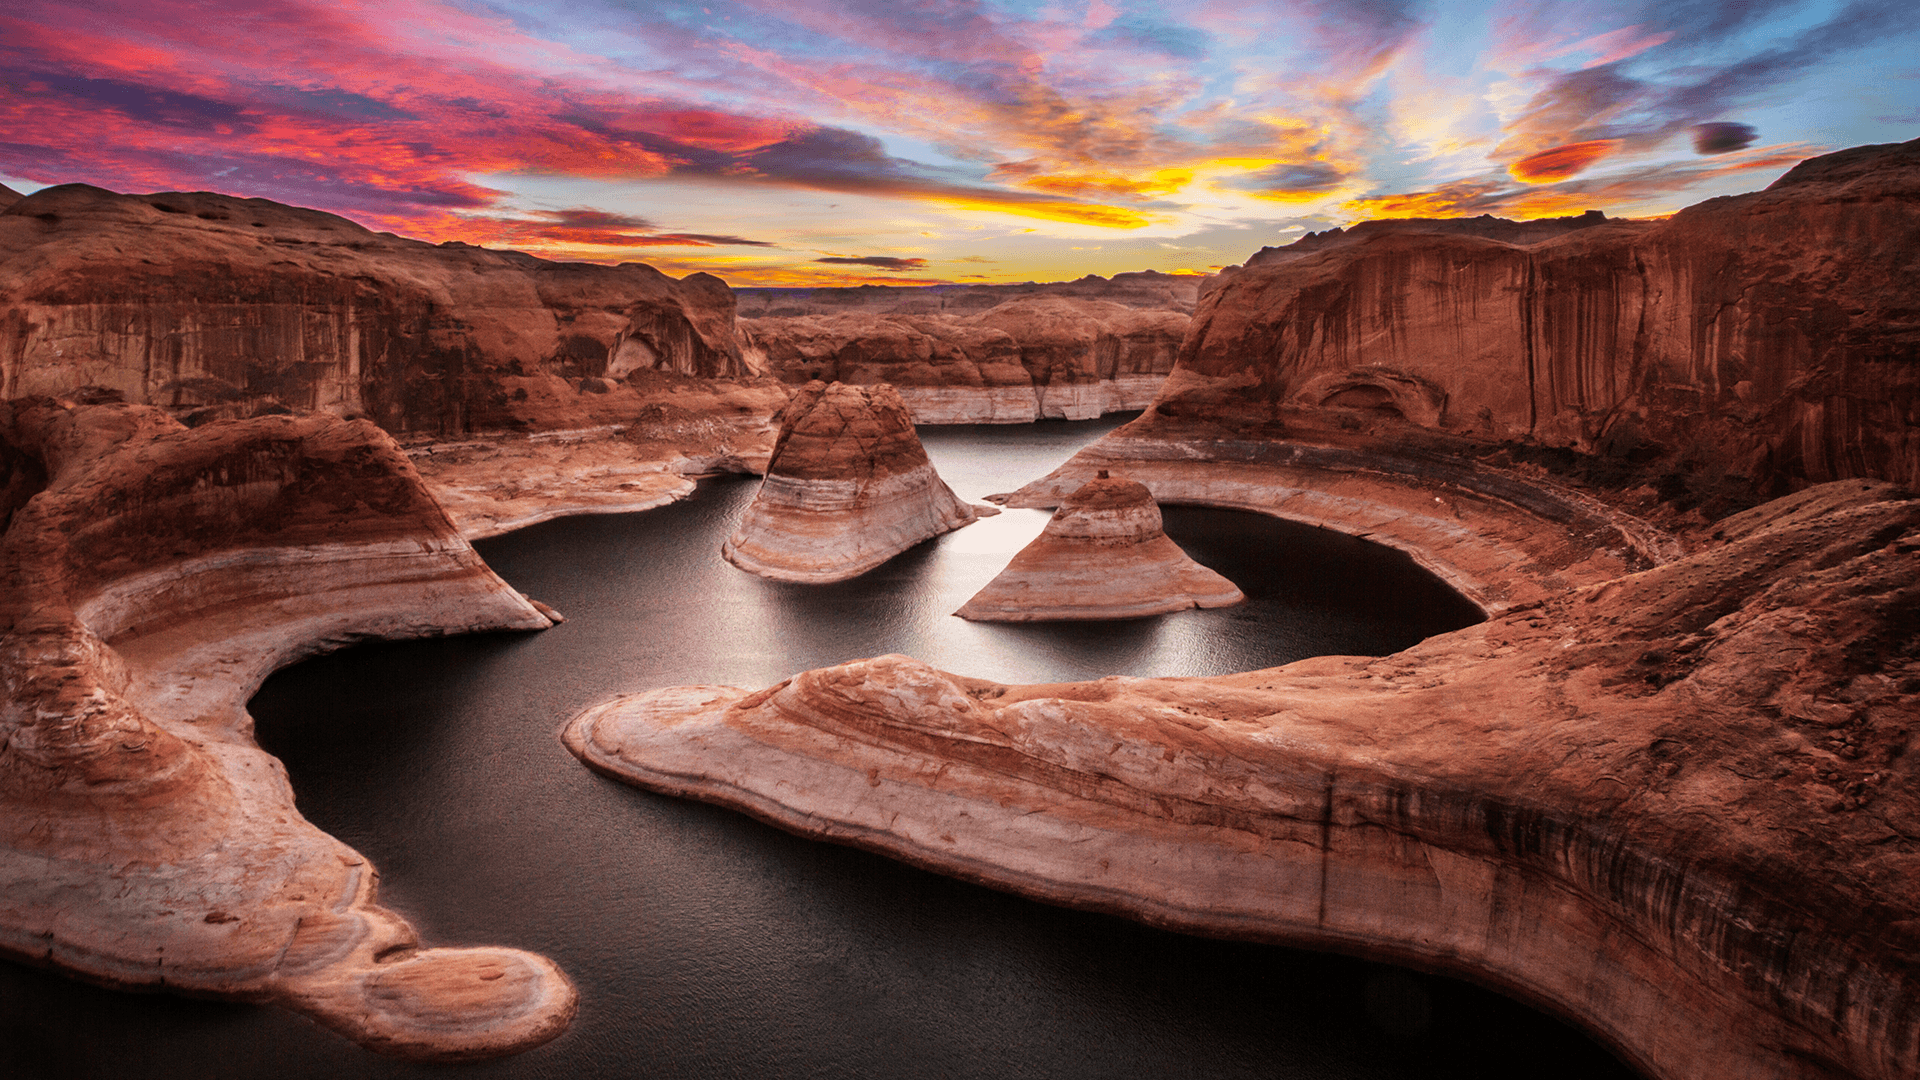 How do you get to Reflection Canyon in Utah?